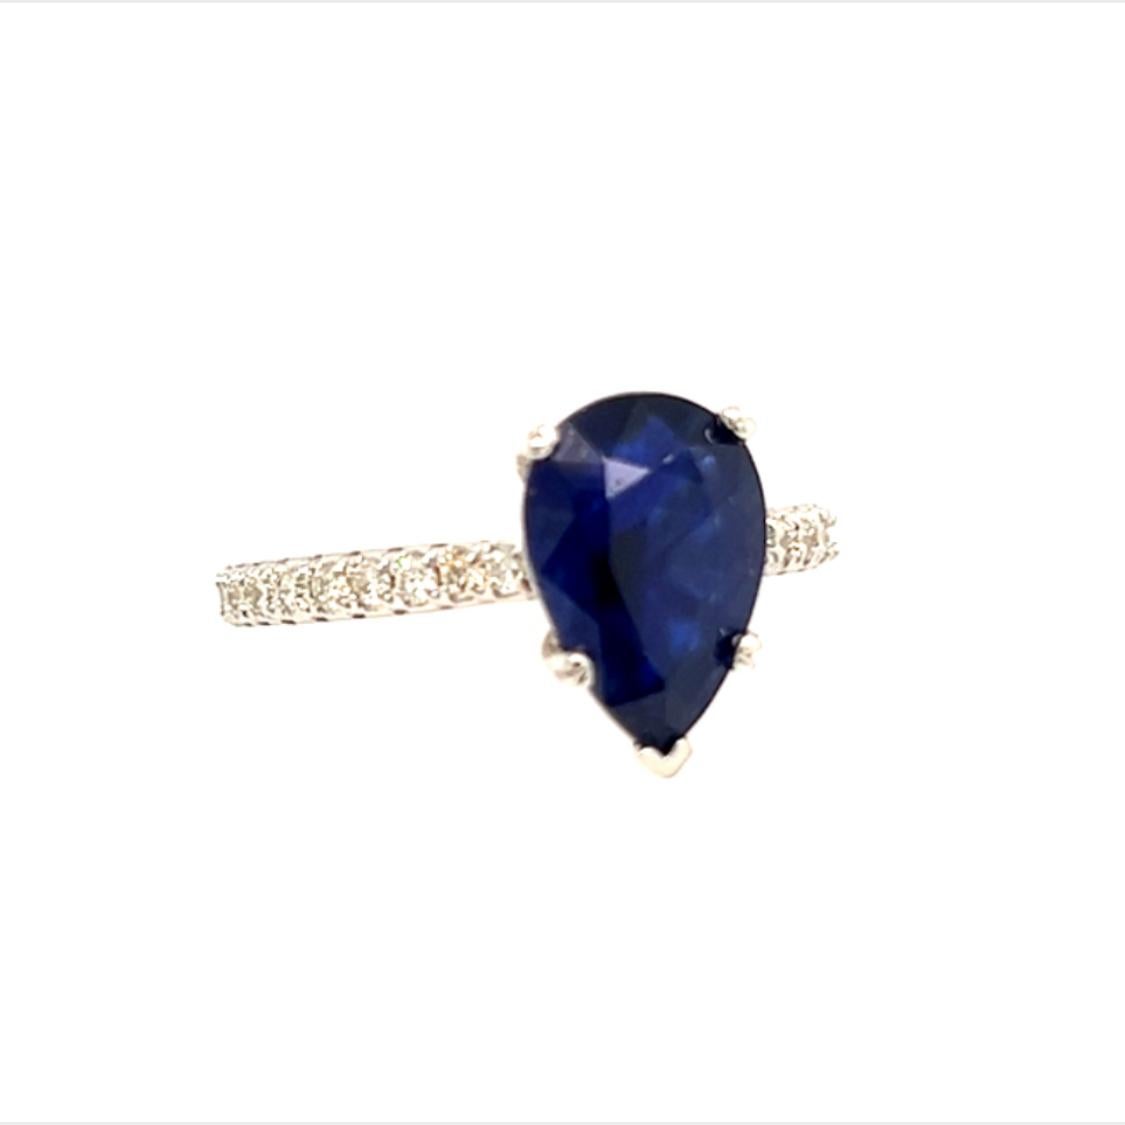 Sapphire Diamond Ring Size 6.5 14k Gold 2.77 TCW Certified For Sale 3